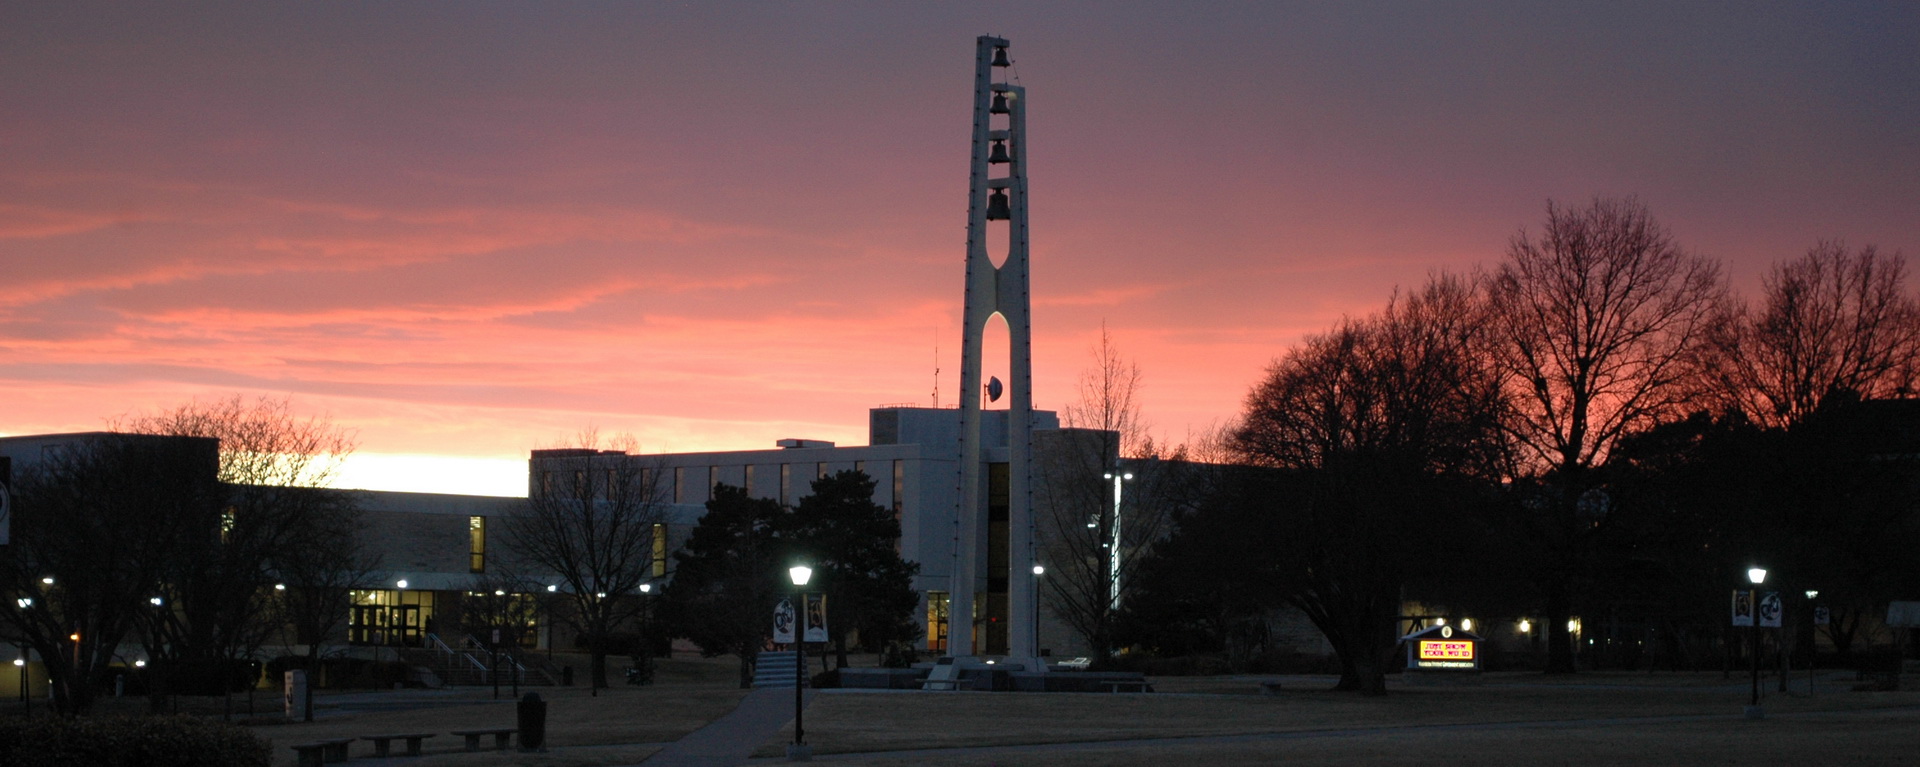 westward sunset view of bell tower